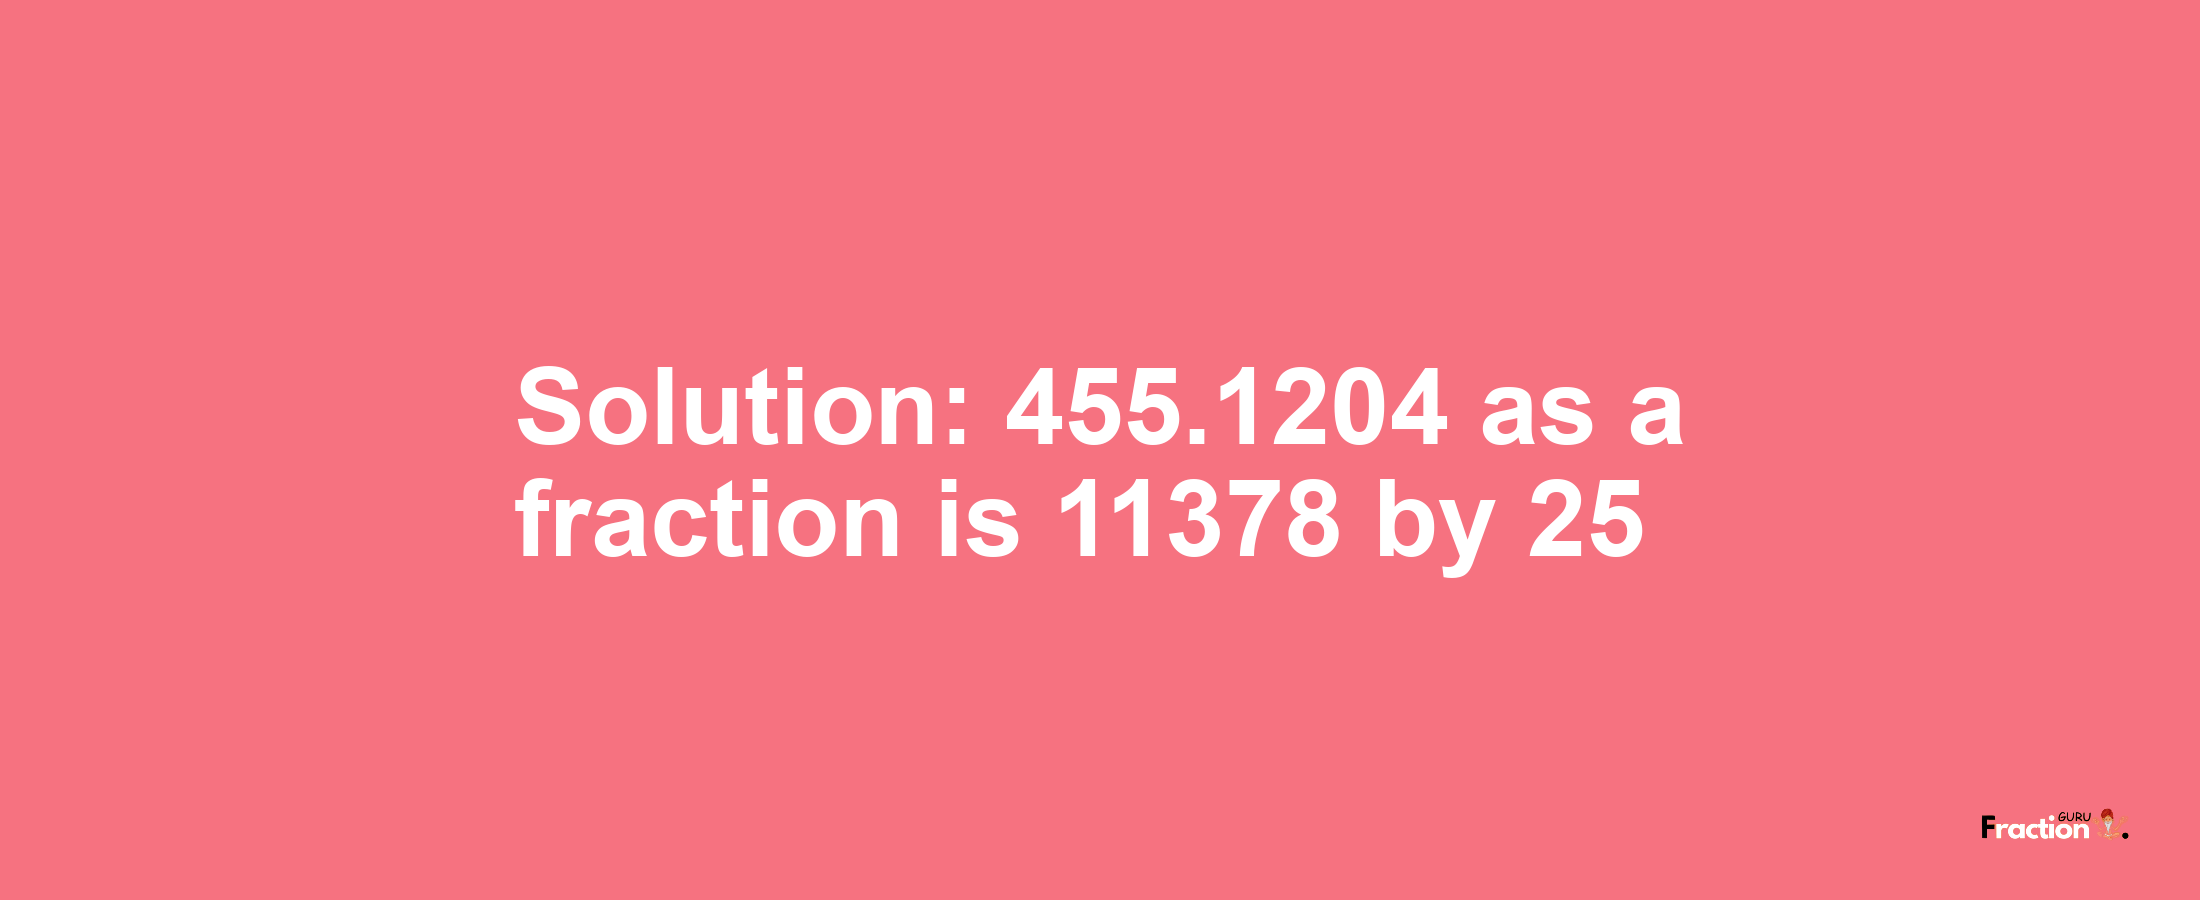 Solution:455.1204 as a fraction is 11378/25